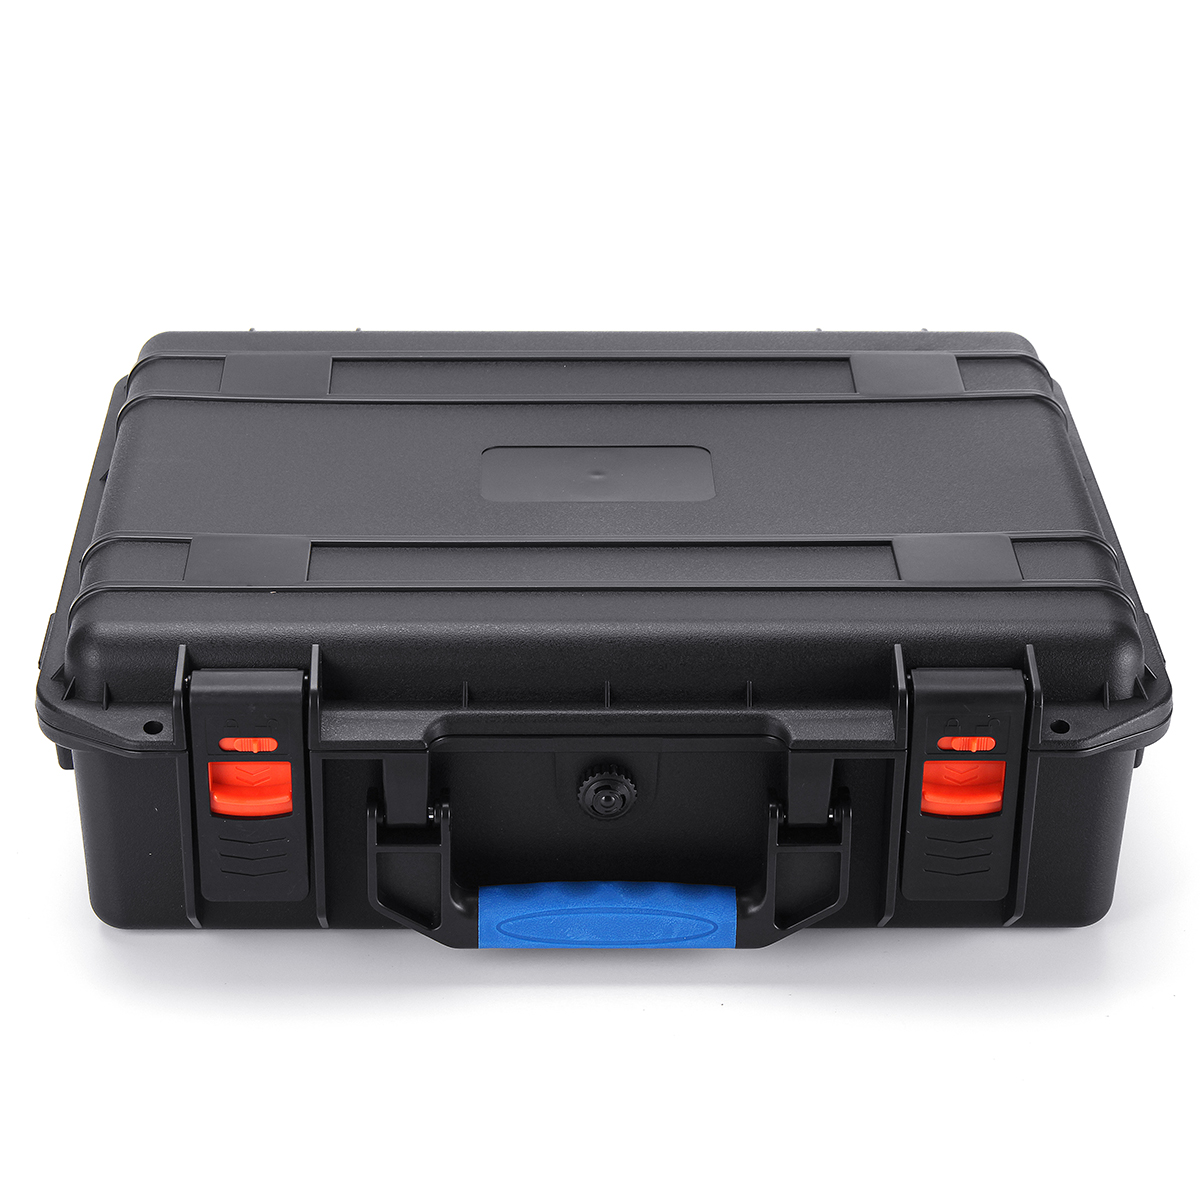 Waterproof-Hard-Carry-Case-Tool-Kits-Impact-Resistant-Shockproof-Storage-Box-Safety-Hardware-toolbox-1665199-5